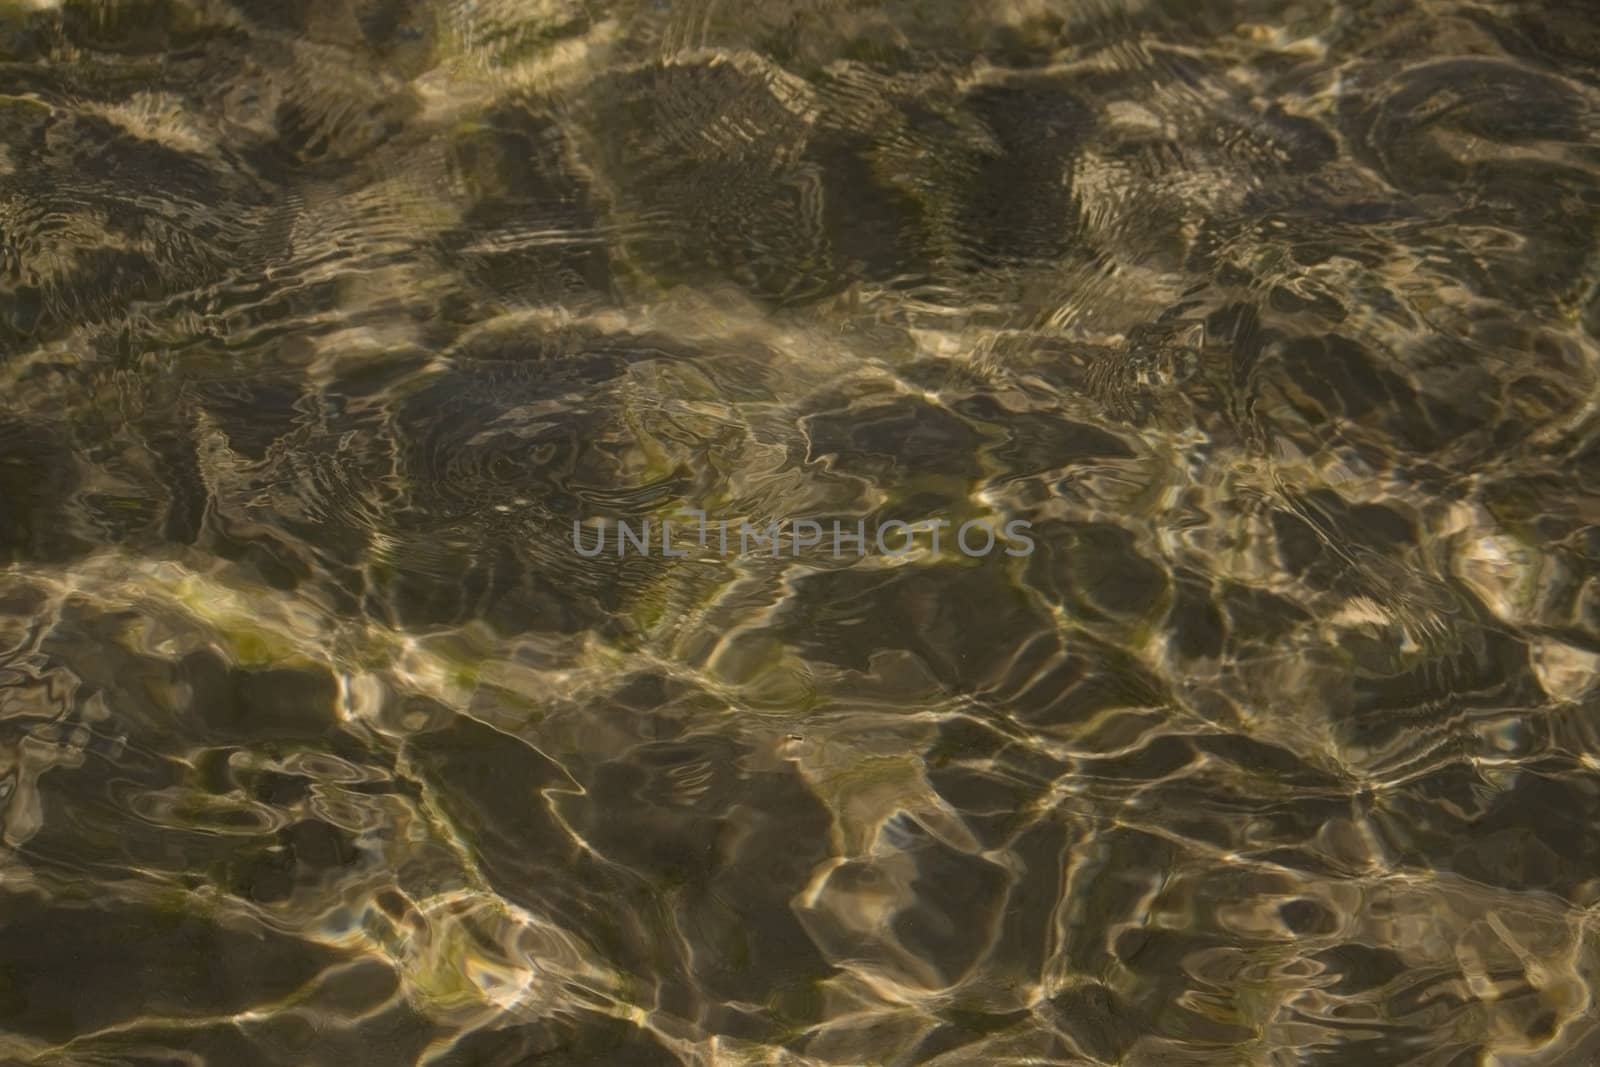 This unusual background is a rocky sea bottom under water.